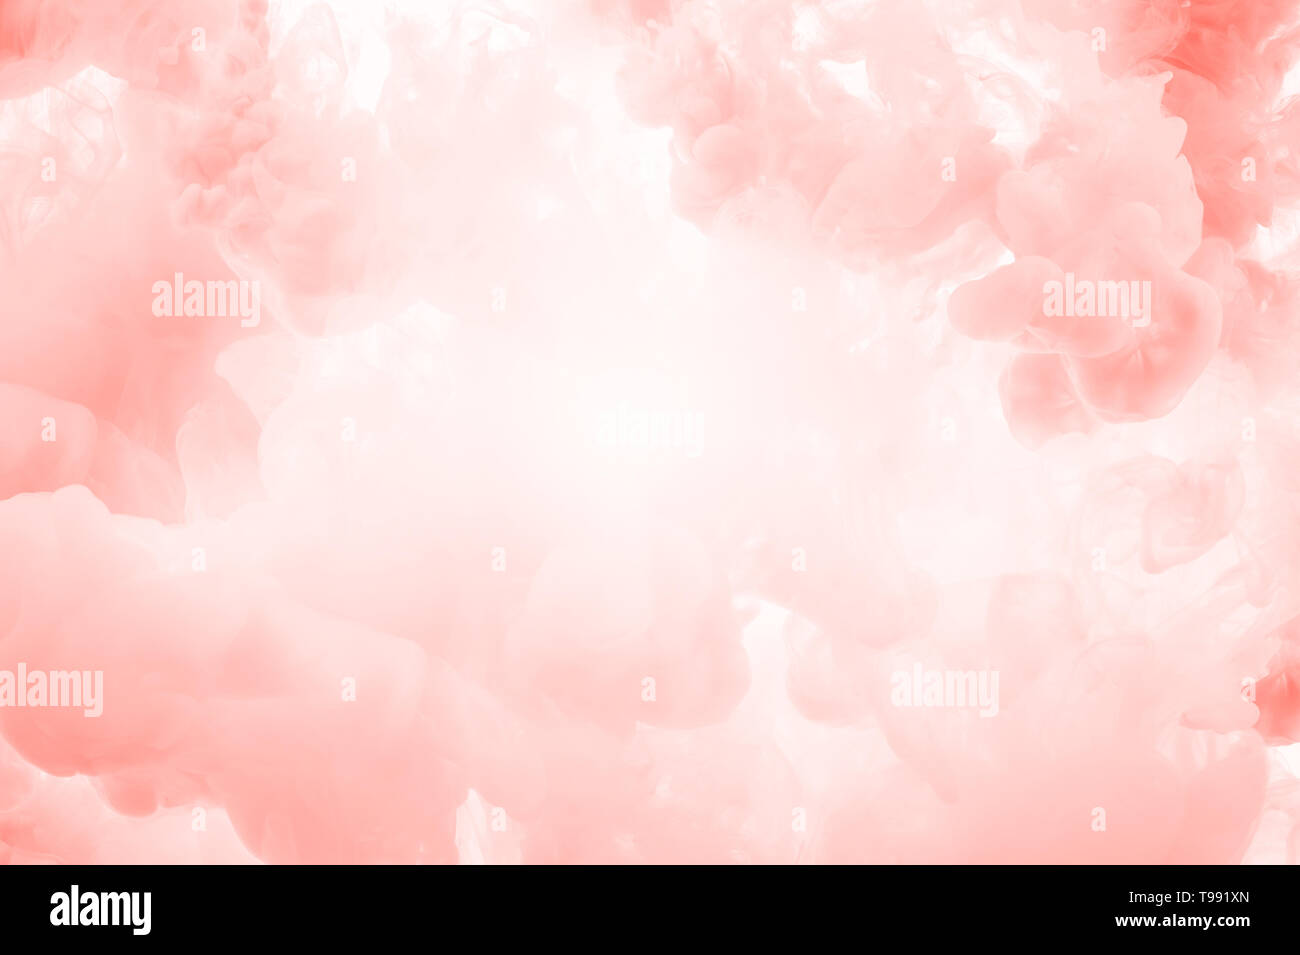 Coral ink splashes abstrct background. Studio shot with seamless ...